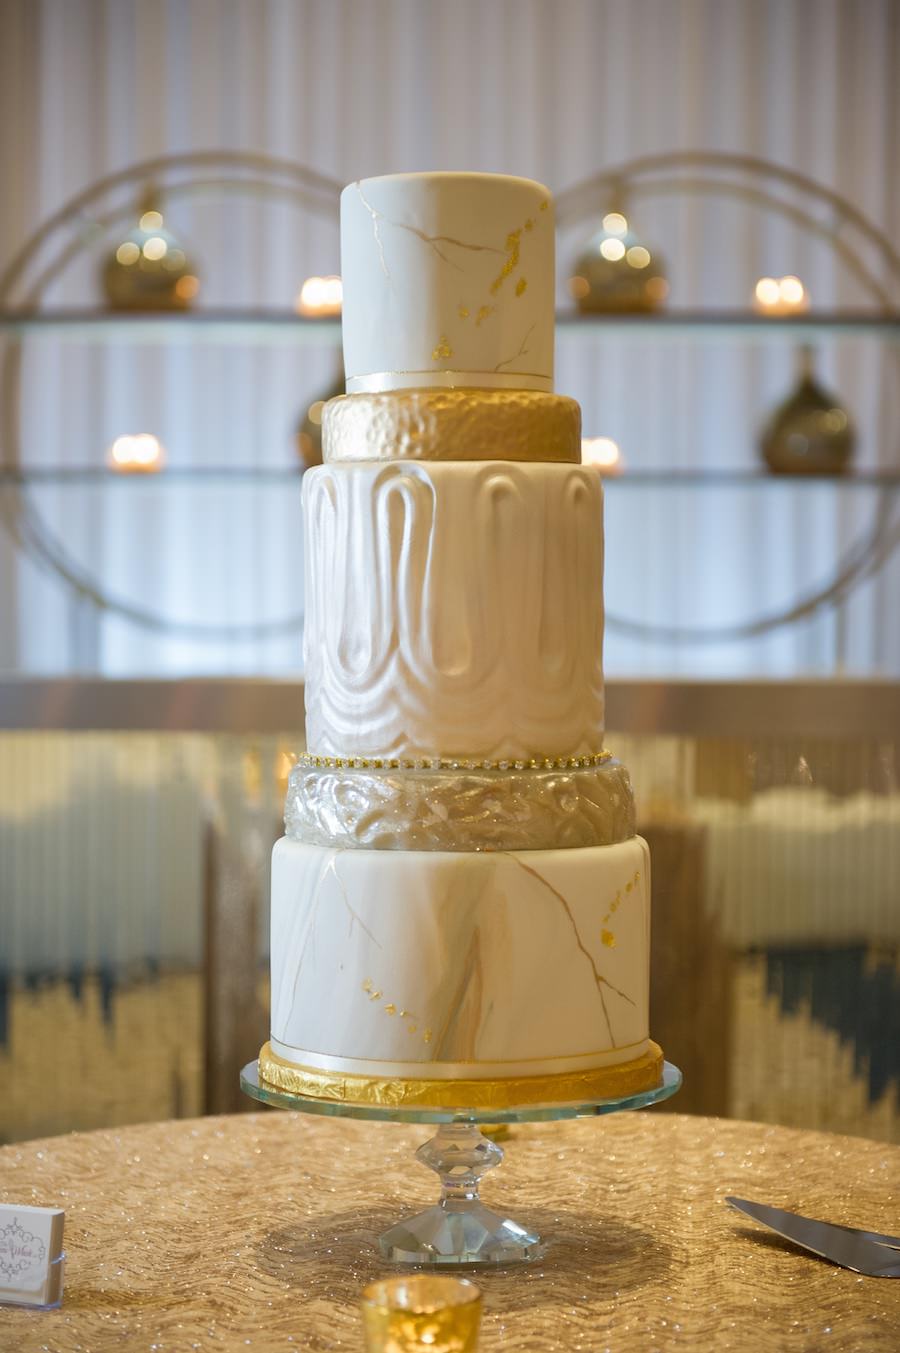 Modern Gold South Beach Inspired Wedding Reception Decor with Great Gatsby Silver Bar and 5-Tier Gold Wedding Cake the Artistic Whisk | Clearwater Beach Wedding Venue Wyndham Grand | Wedding Planner Parties a la Carte